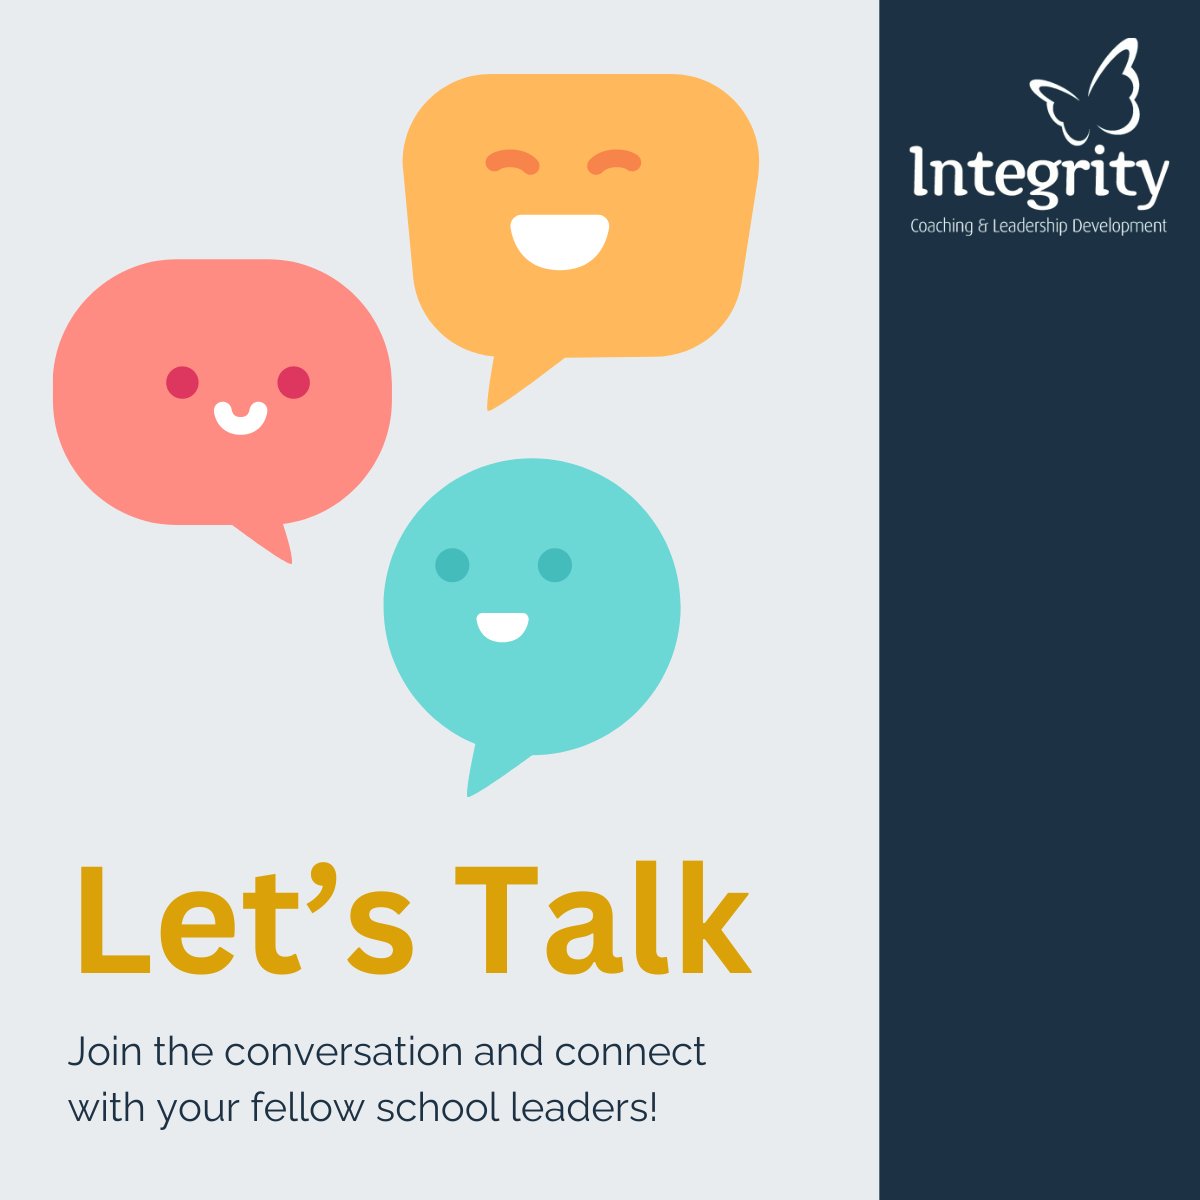 🗨️ School leaders, let's talk!

We know you juggle a million things, and the hidden challenges can be the toughest. So, today we ask you:

What's your biggest leadership hurdle right now?

Join the conversation! 

#ukedchat #headteachers #schoolleaders